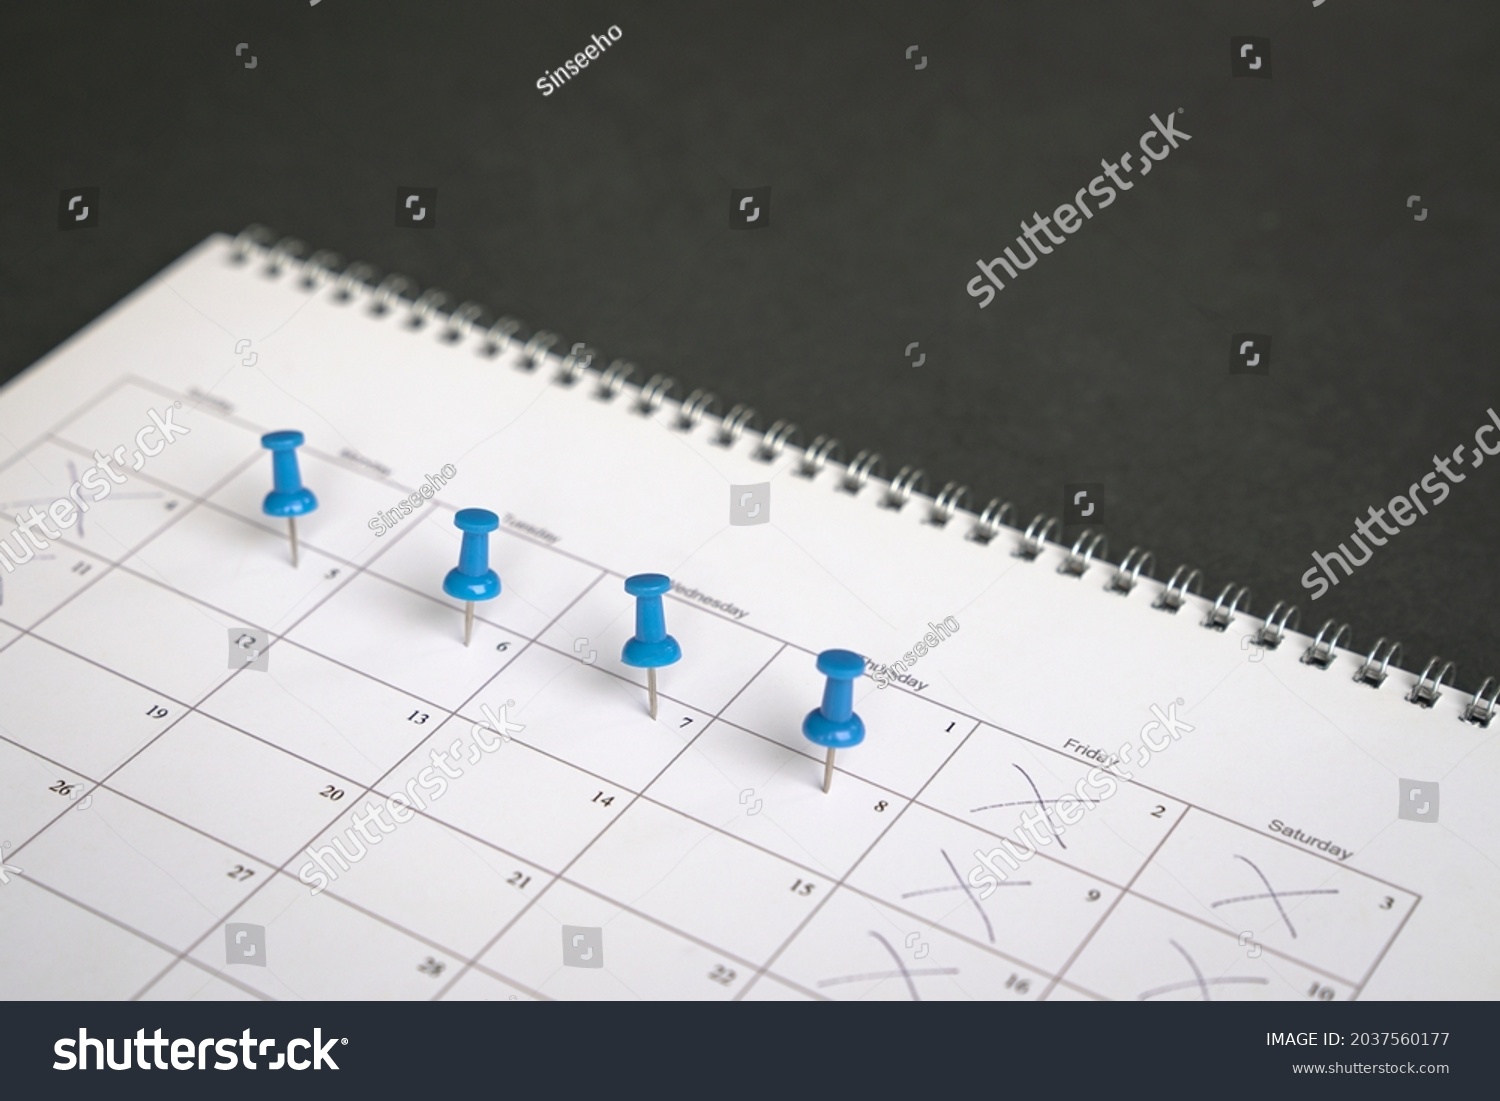 Blue pins on four days in a week on a calendar. Friday, Saturday and Sunday crossed out. Four day work week concept. #2037560177